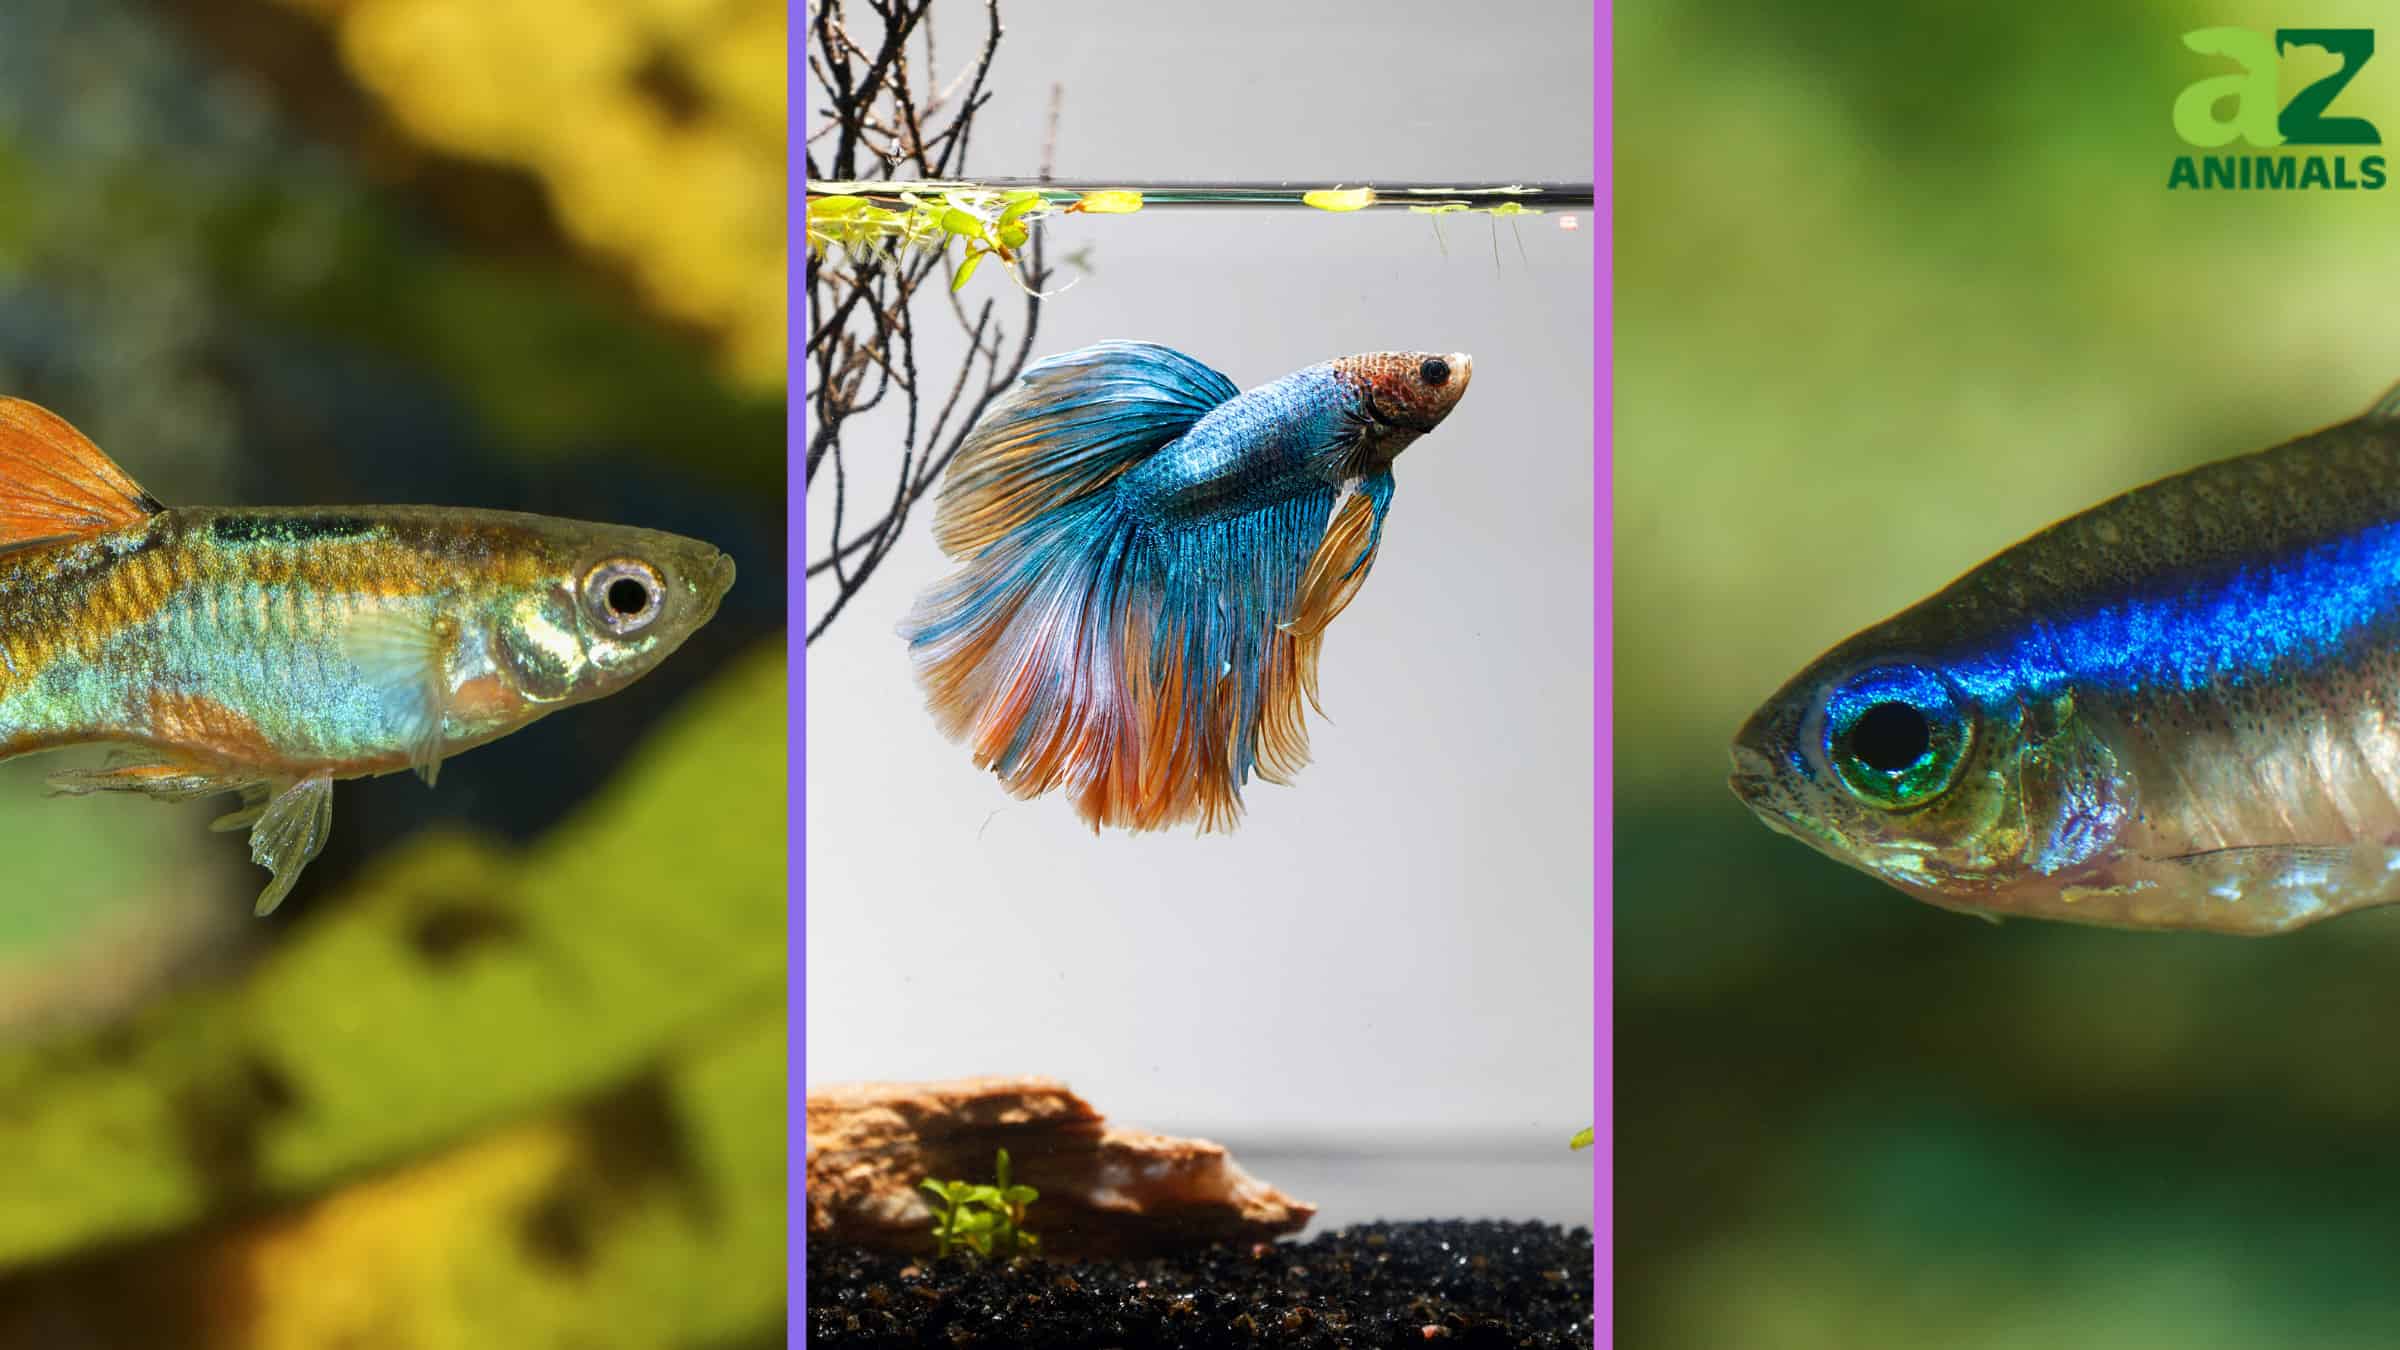 7 GREAT TROPICAL FISH TO PUT IN A SMALL AQUARIUM - The Fish Room TFR